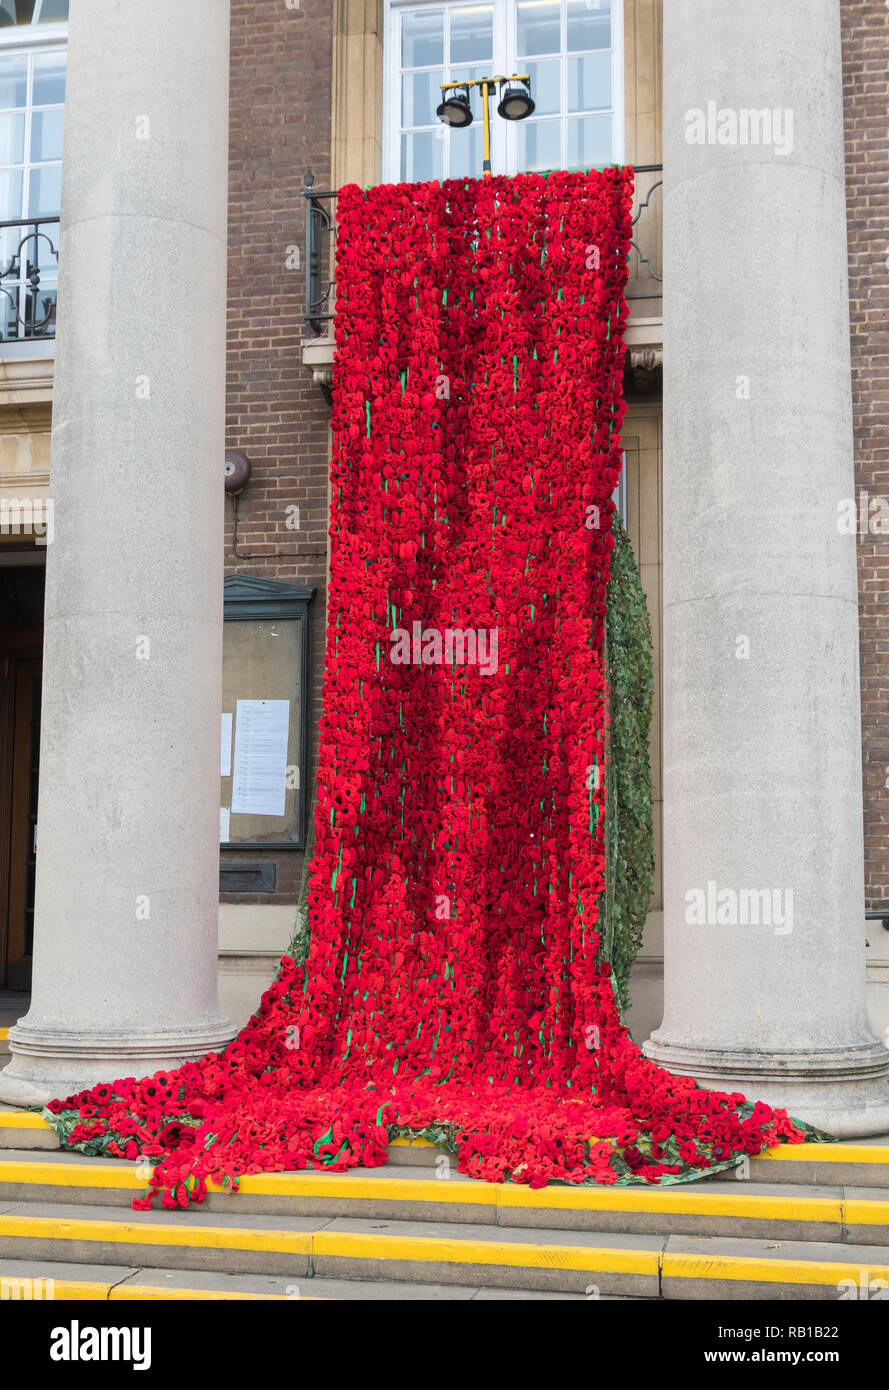 Display of poppies draped over balconies outside Worthing Town Hall for Remembrance Day 2018 in Worthing, West Sussex, England, UK. Stock Photo